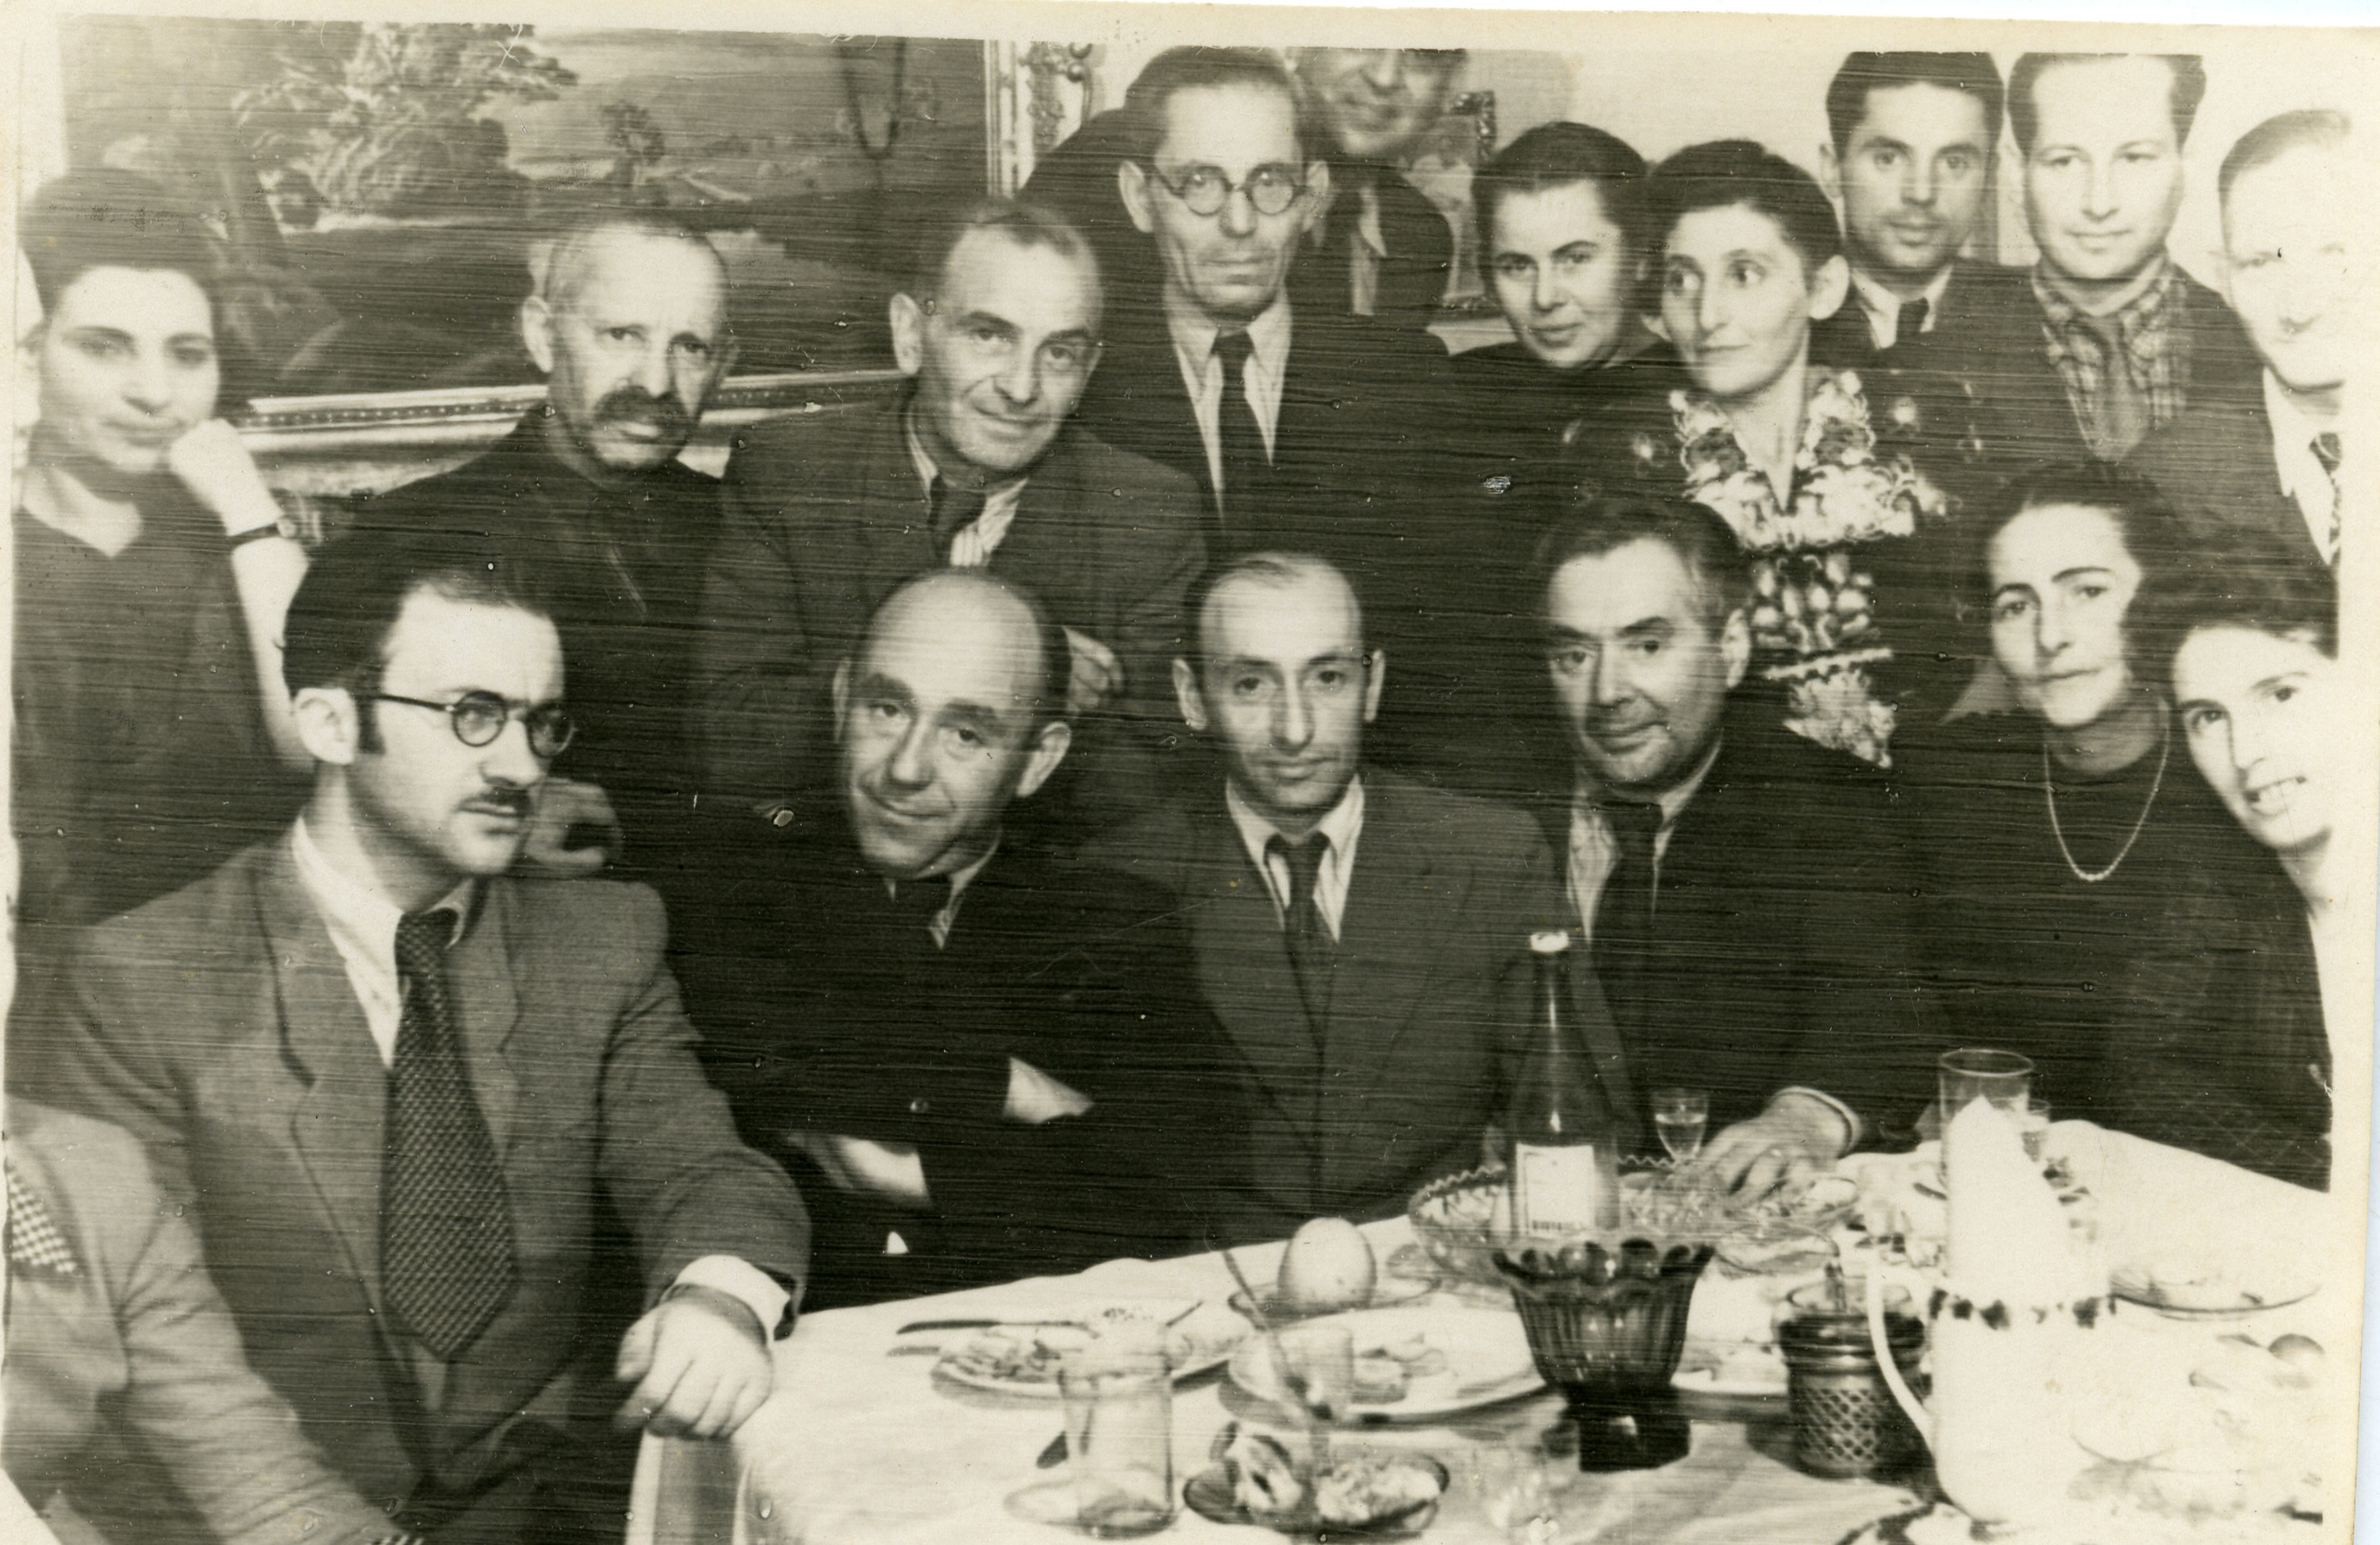 Farewell party for Leyzer Ran, a prominent postwar chronicler of Jewish life in Vilna.  

From Vilna, he and his wife Basheva traveled first to Paris and then, denied entry to the United States, to Cuba. 

Among those pictured are Leyzer Ran (front, center),  his wife Basheva (Konski) Ran (front row, far right),  Avraham Sutzkever, (front, left) and his wife Freydke (back, far left).